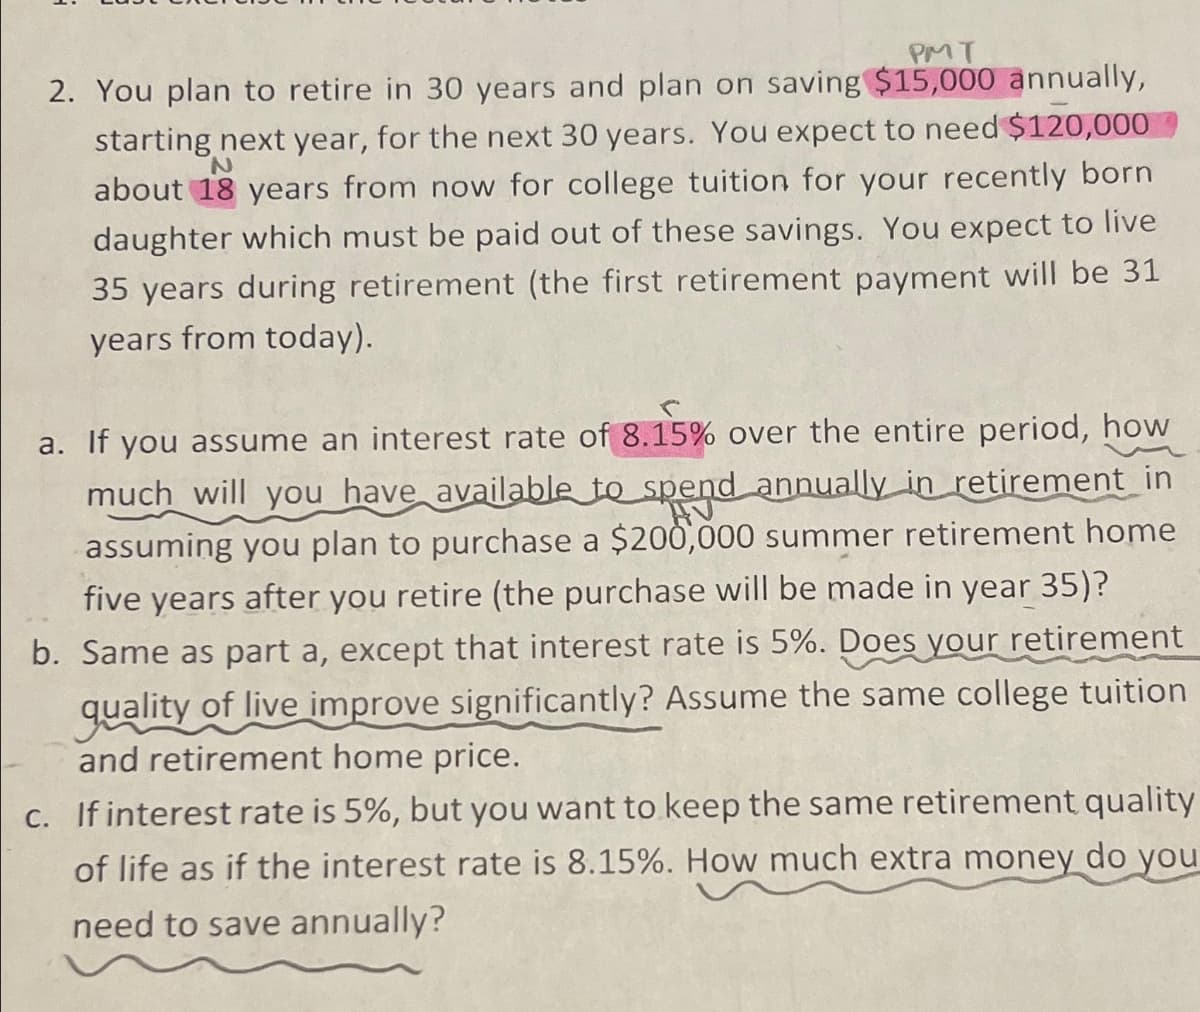 PMT
2. You plan to retire in 30 years and plan on saving $15,000 annually,
N
starting next year, for the next 30 years. You expect to need $120,000
about 18 years from now for college tuition for your recently born
daughter which must be paid out of these savings. You expect to live
35 years during retirement (the first retirement payment will be 31
years from today).
a. If you assume an interest rate of 8.15% over the entire period, how
much will you have available to spend annually in retirement in
assuming you plan to purchase a $200,000 summer retirement home
five years after you retire (the purchase will be made in year 35)?
b. Same as part a, except that interest rate is 5%. Does your retirement
quality of live improve significantly? Assume the same college tuition
and retirement home price.
c. If interest rate is 5%, but you want to keep the same retirement quality
of life as if the interest rate is 8.15%. How much extra money do you
need to save annually?